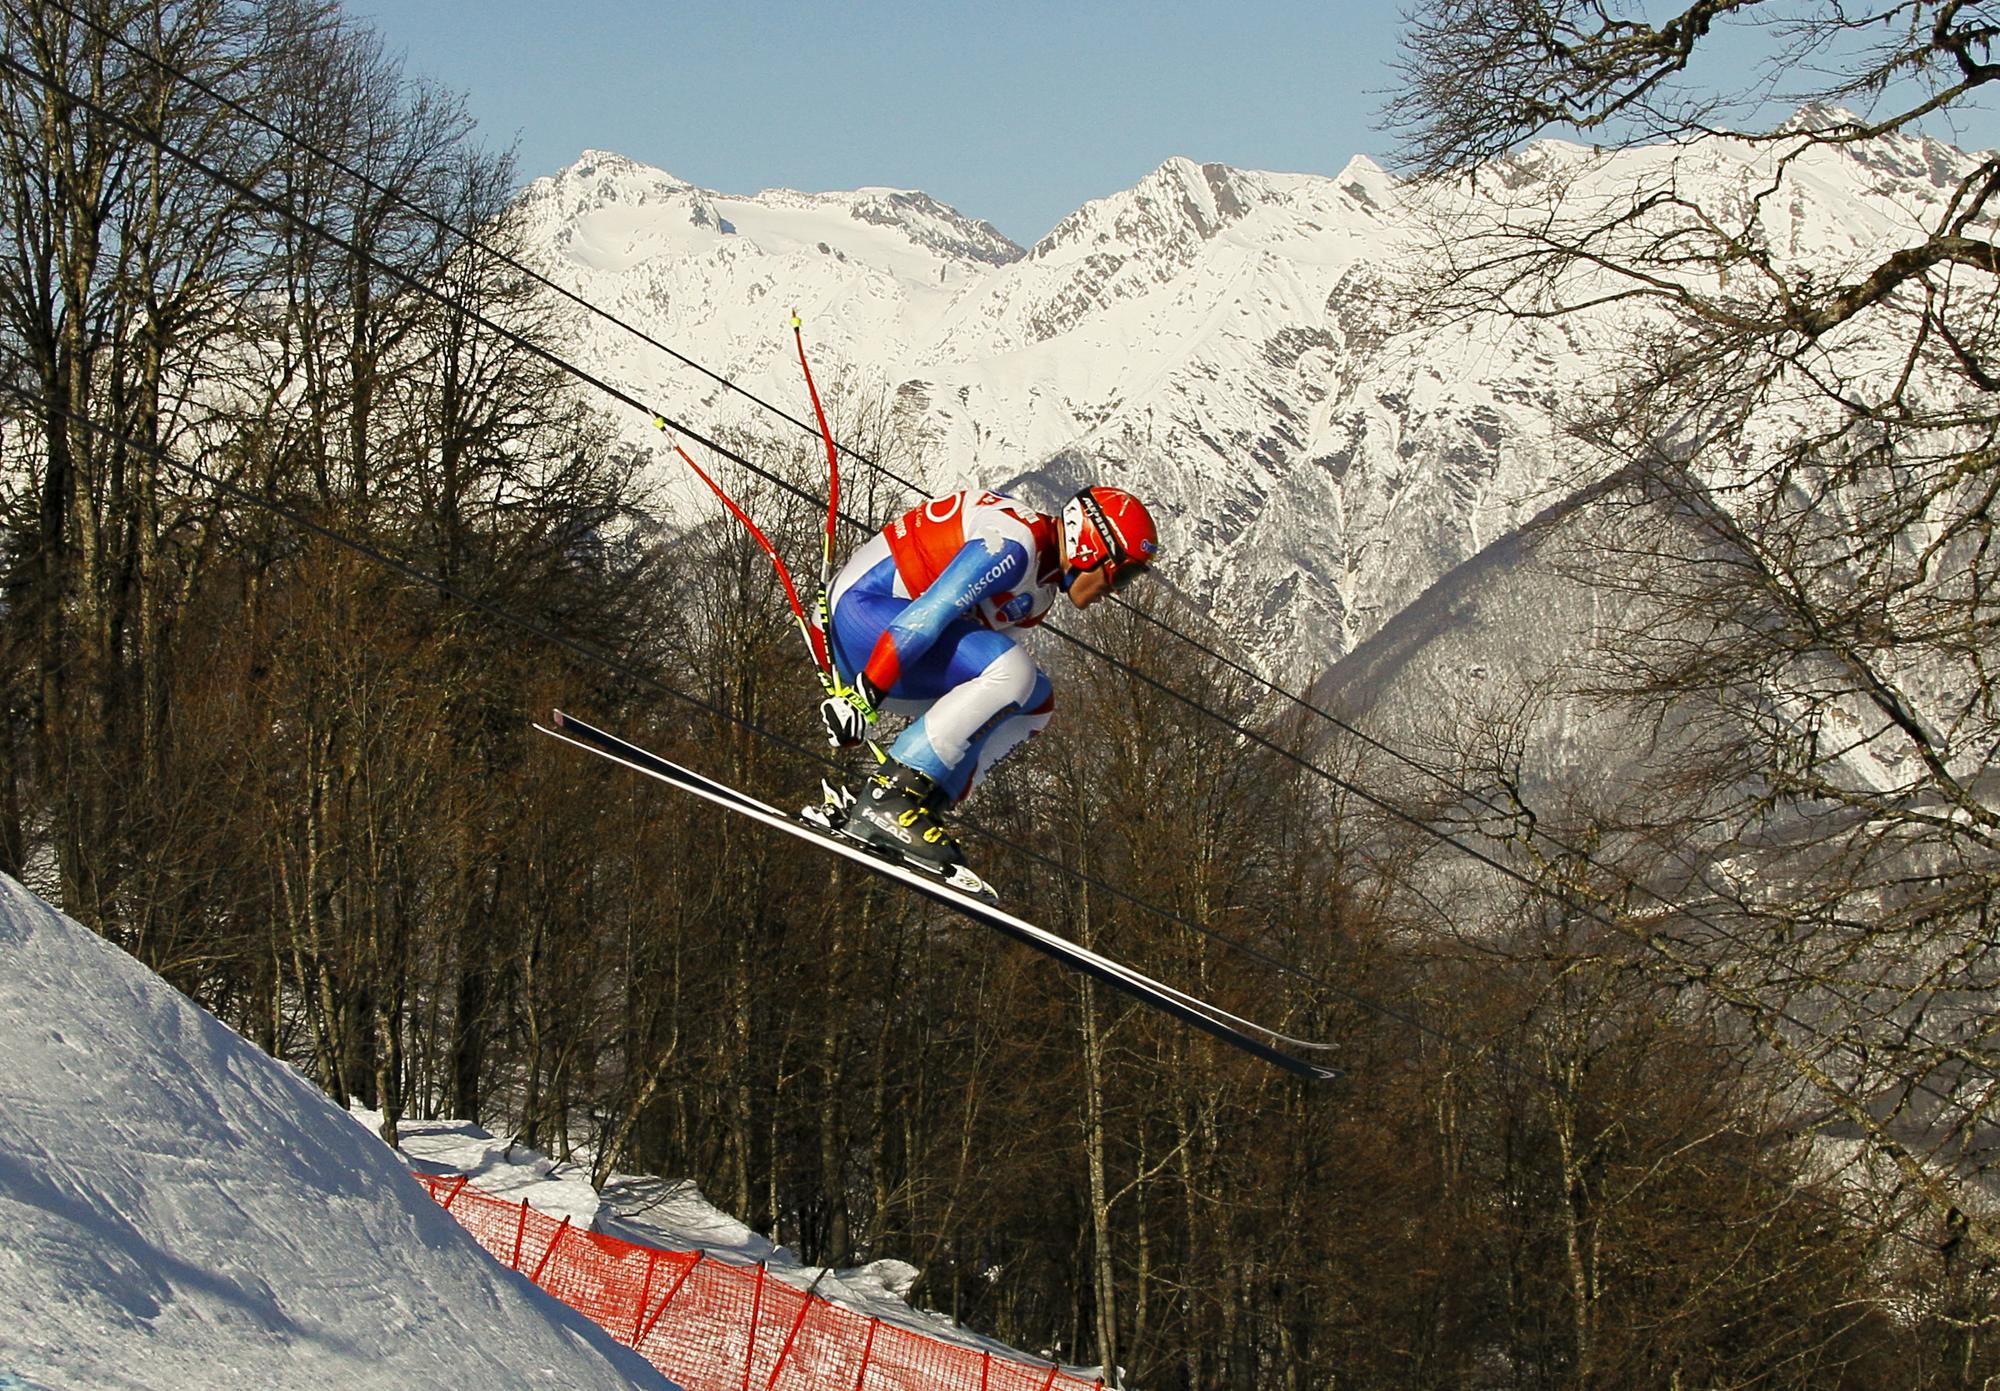 Didier Cuche of Switzerland clears the "Russian Trampoline" jump during the first practice run for the men's Alpine Skiing World Cup Downhill race in Rosa Khutor near Sochi February 8, 2012. REUTERS/Wolfgang Rattay (RUSSIA - Tags: SPORT SKIING) [Wolfgang Rattay]